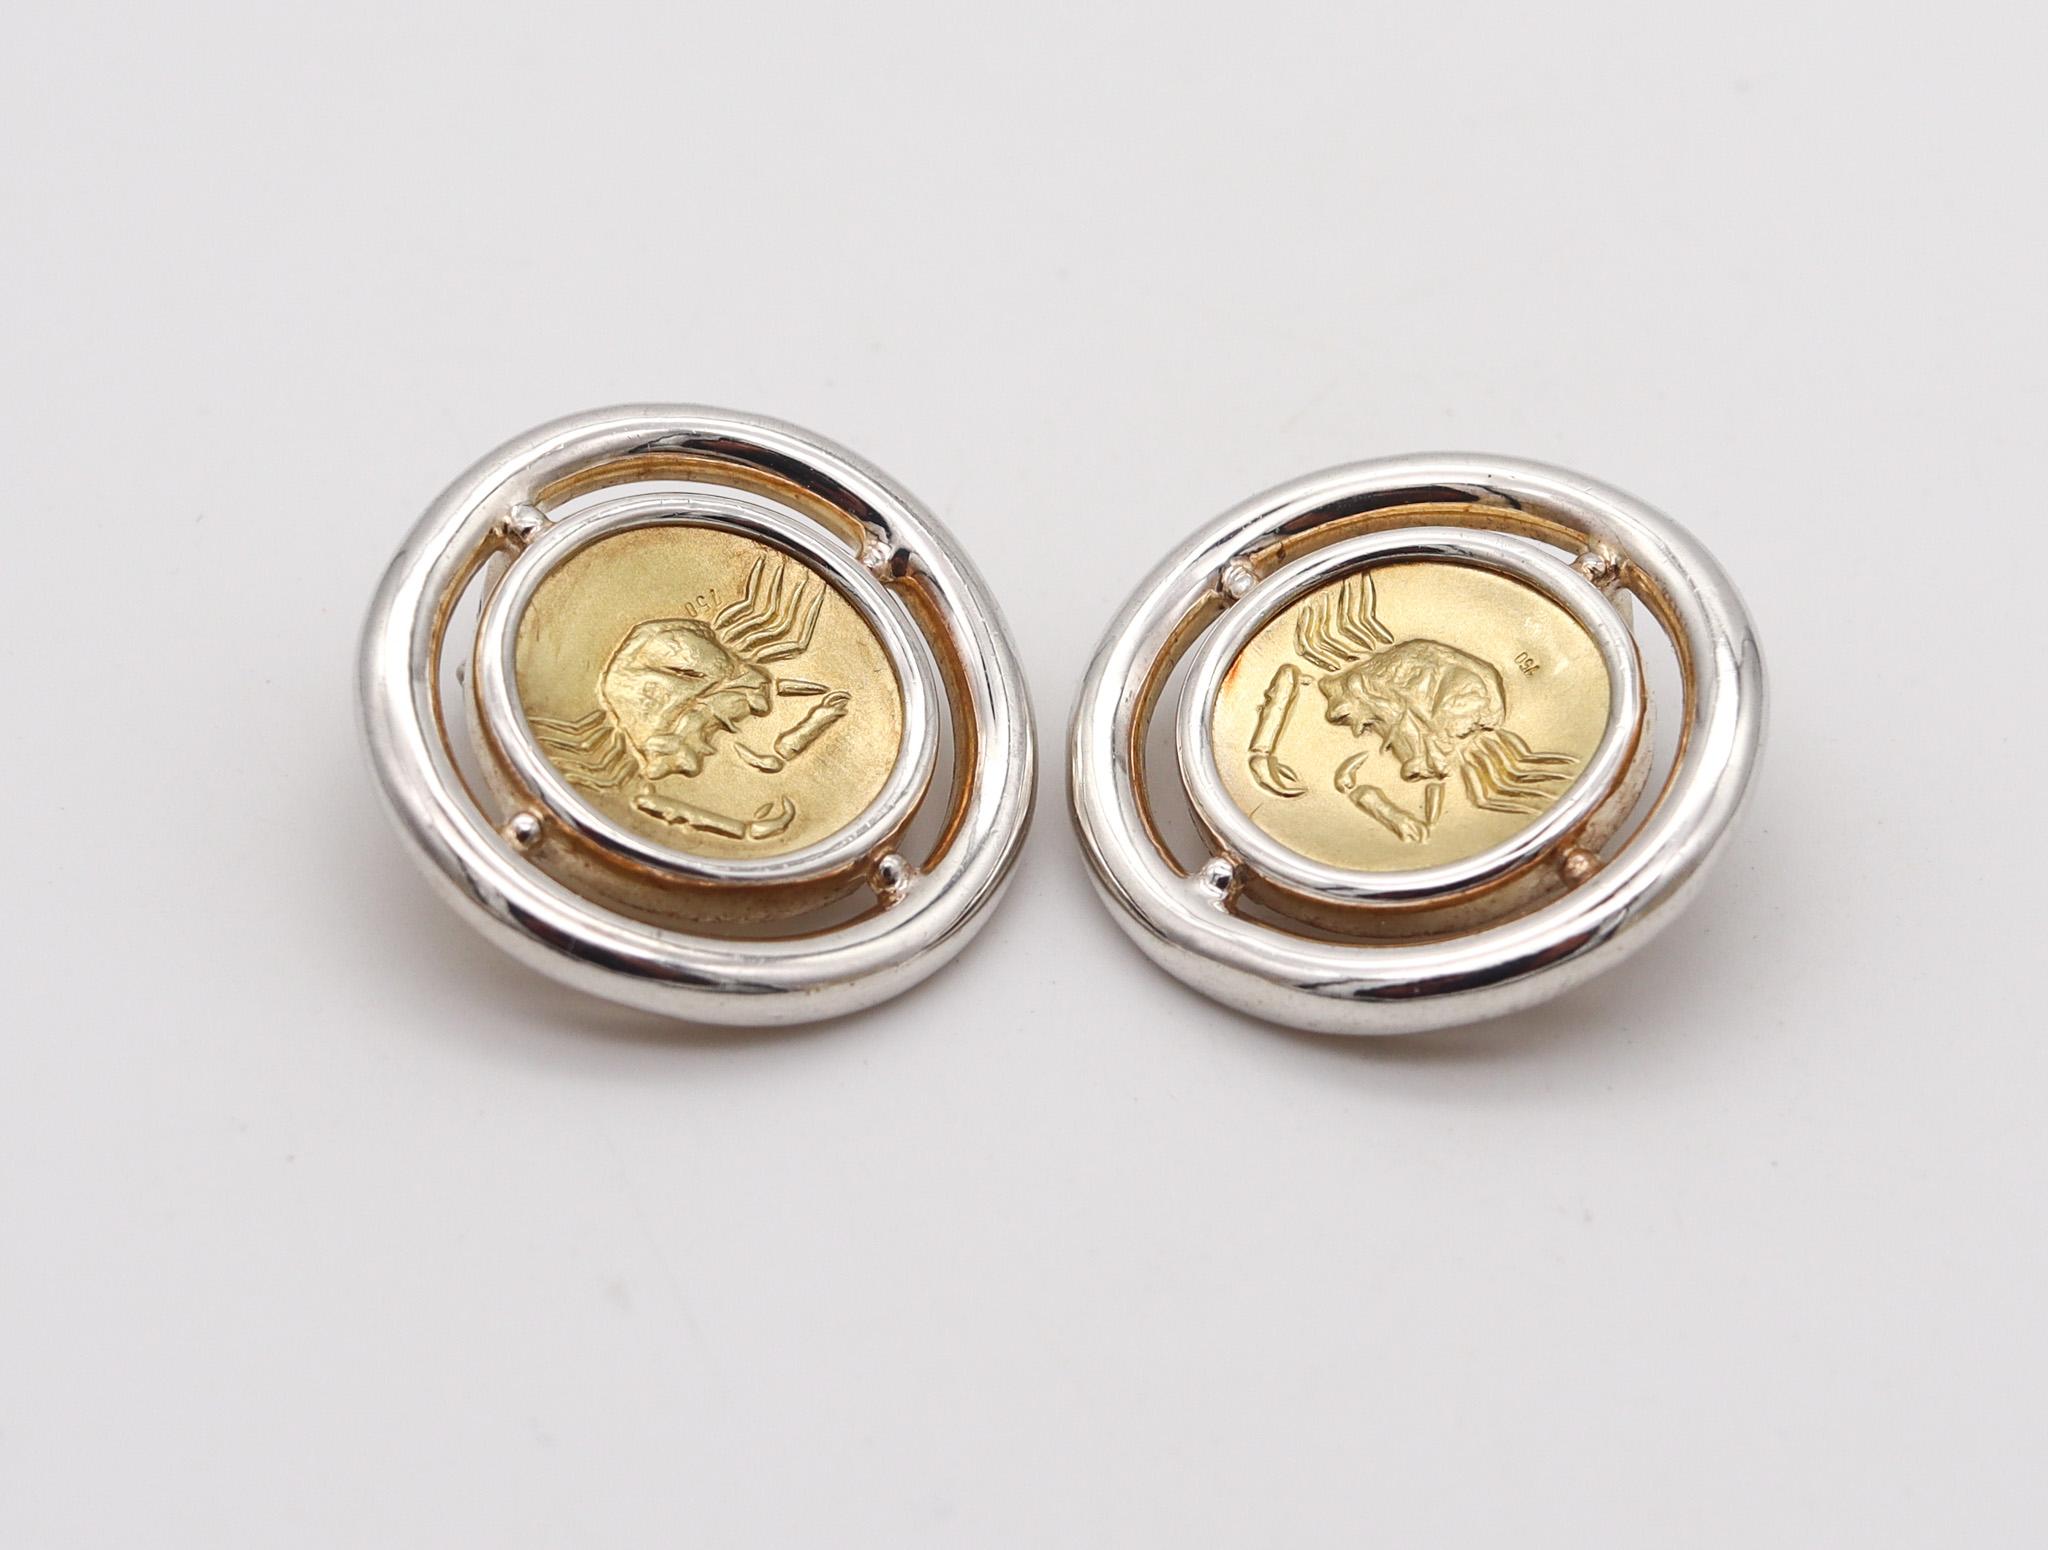 A pair of zodiacal earrings designed by Ilias Lalaounis.

Beautiful clips-on earrings, created in Greece by the jewelry house of Ilias Lalaounis back in the 1970. These beautiful vintage pair are rare and have been carefully crafted in two tones, a